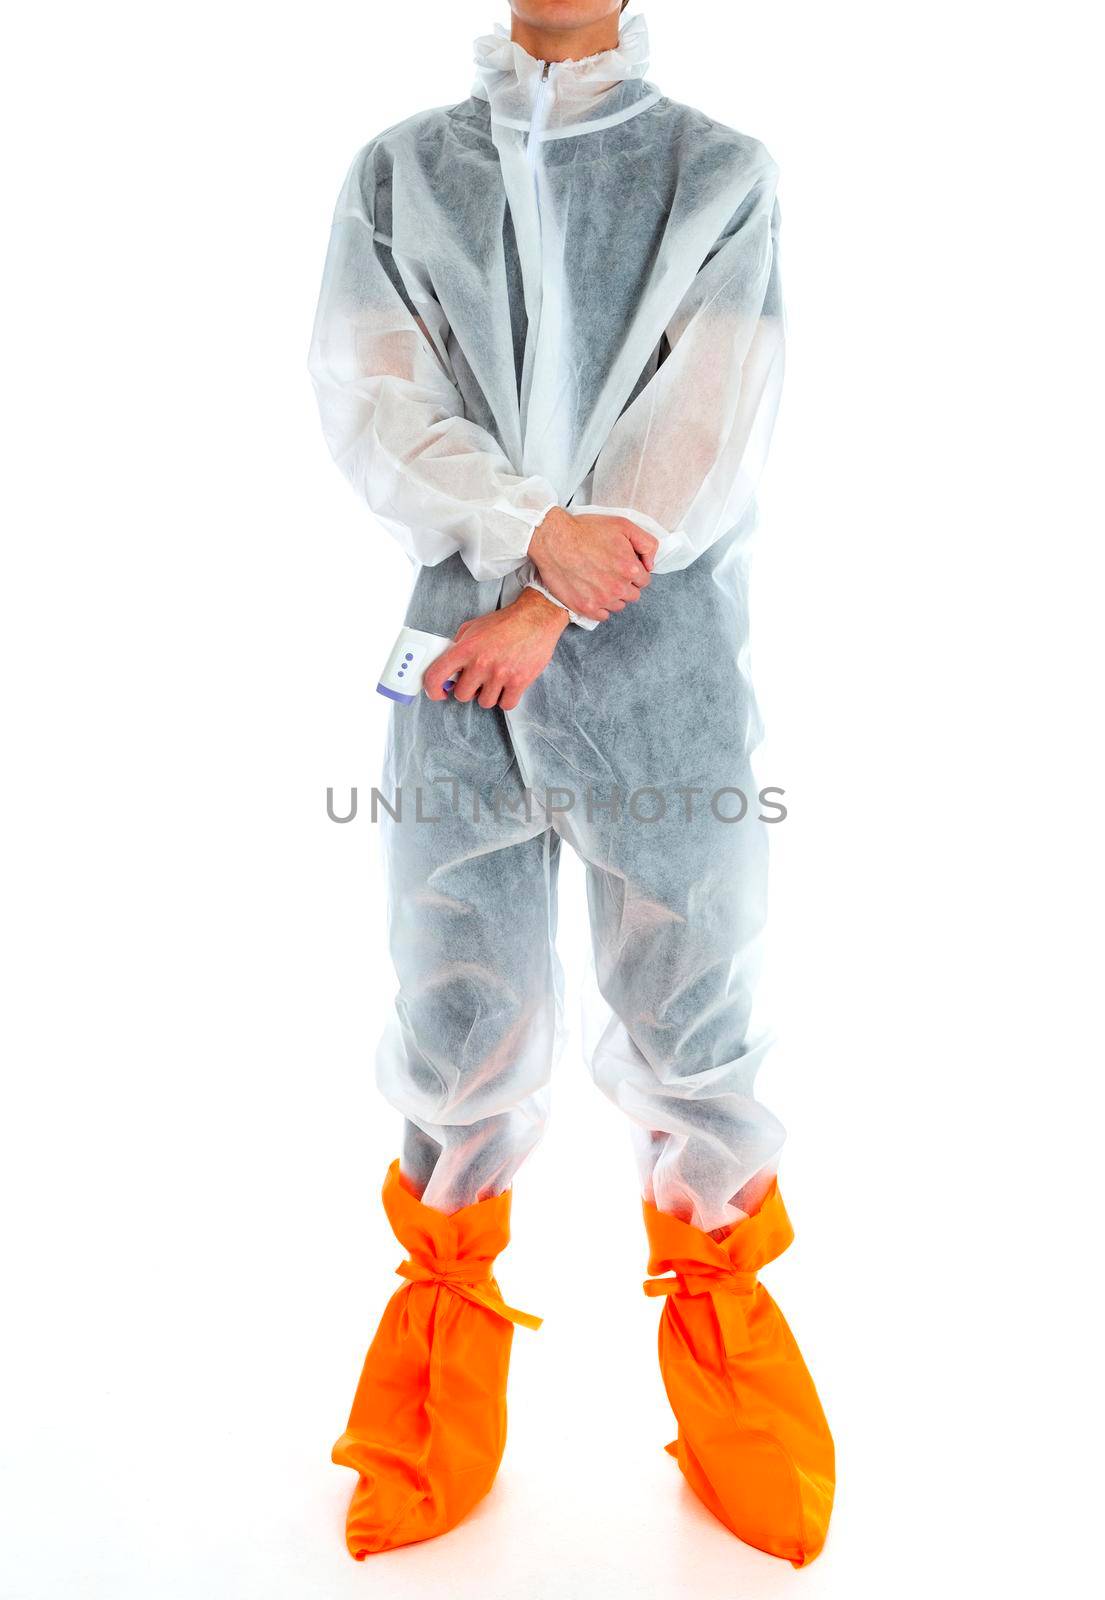 Man wearing protective suit and orange shoes isolated on white background